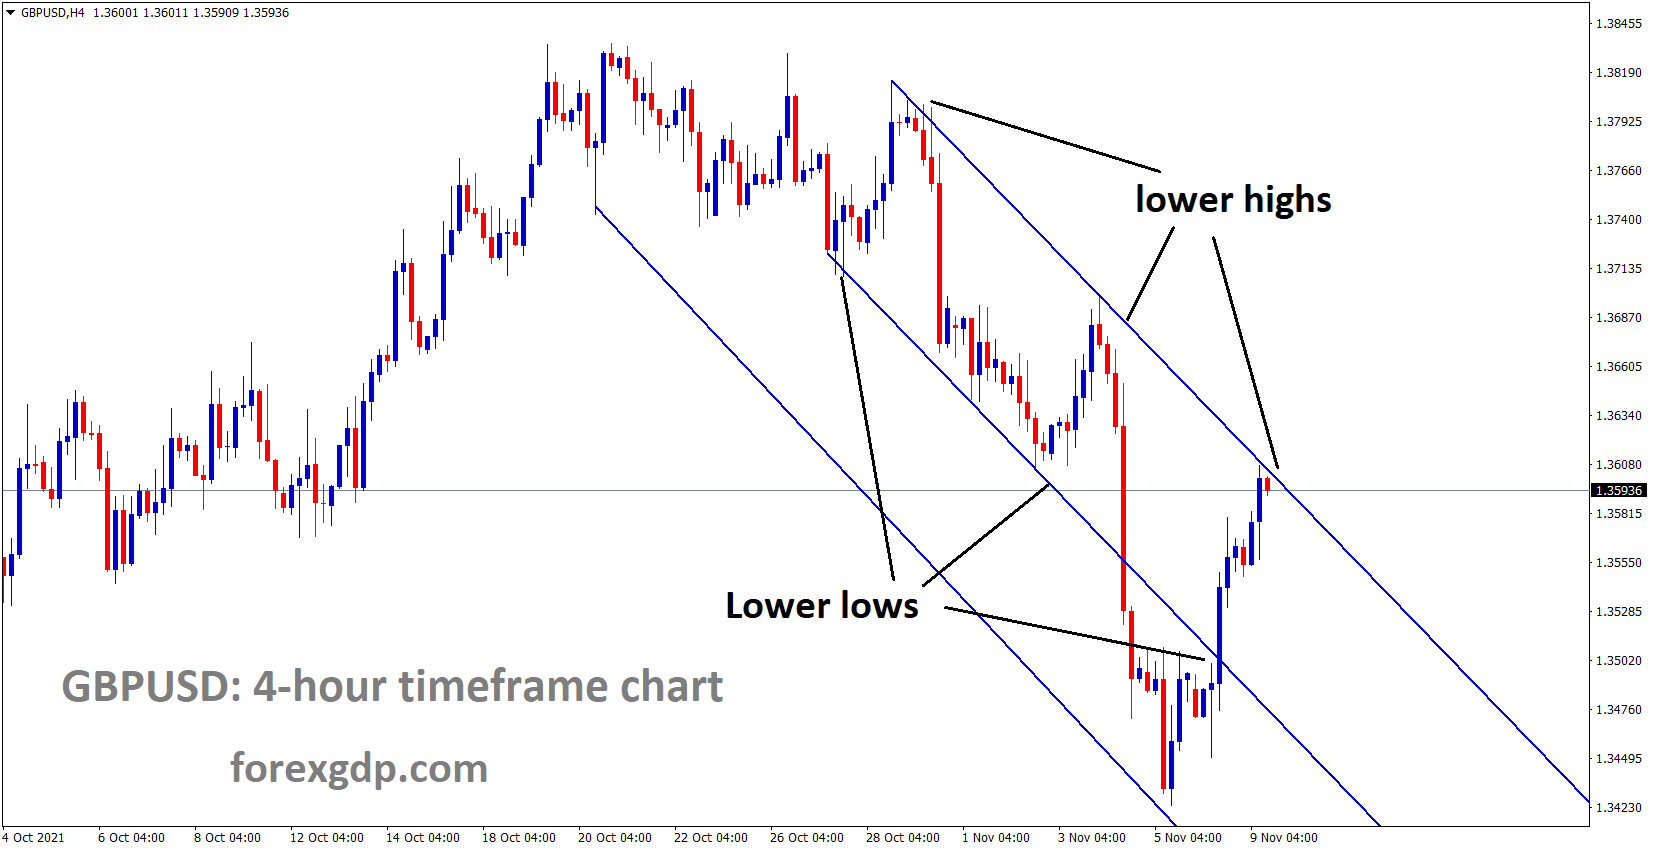 GBPUSD is moving in the Descending channel and market reached the lower high